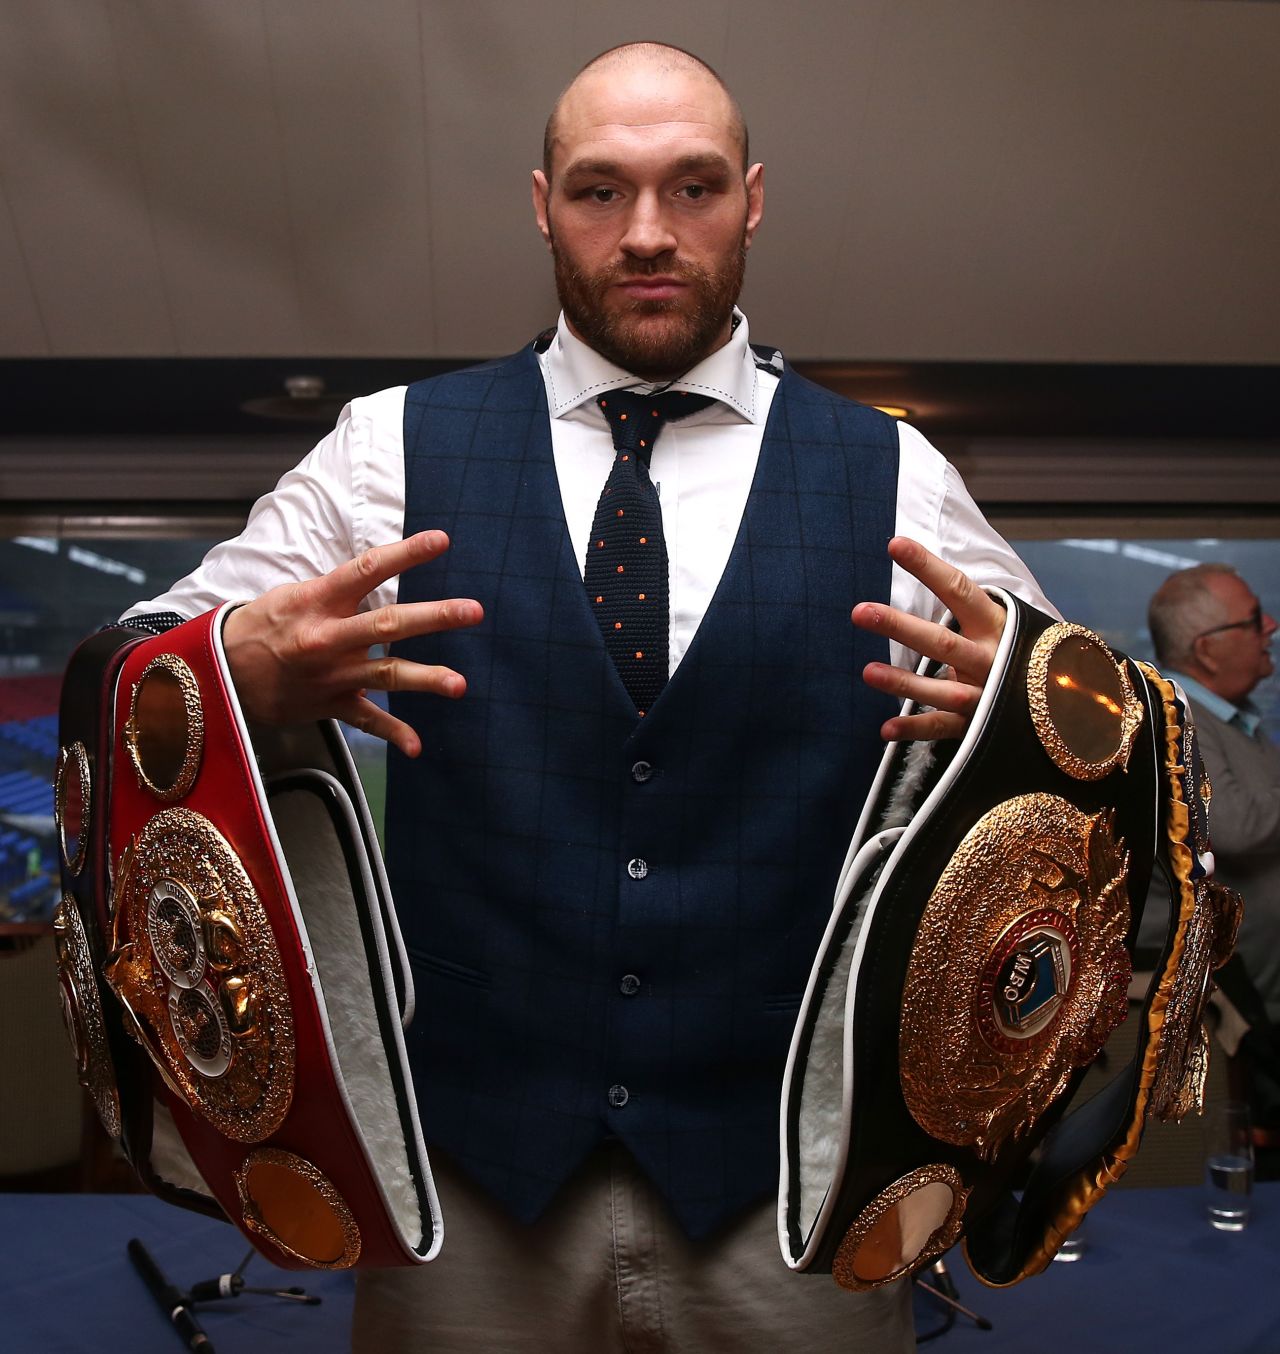 Fury "still has to respect other human beings and respect the diversity that's in this world," said Maloney. "In a way he's become a bit of monster because now he's at the top of pile." 